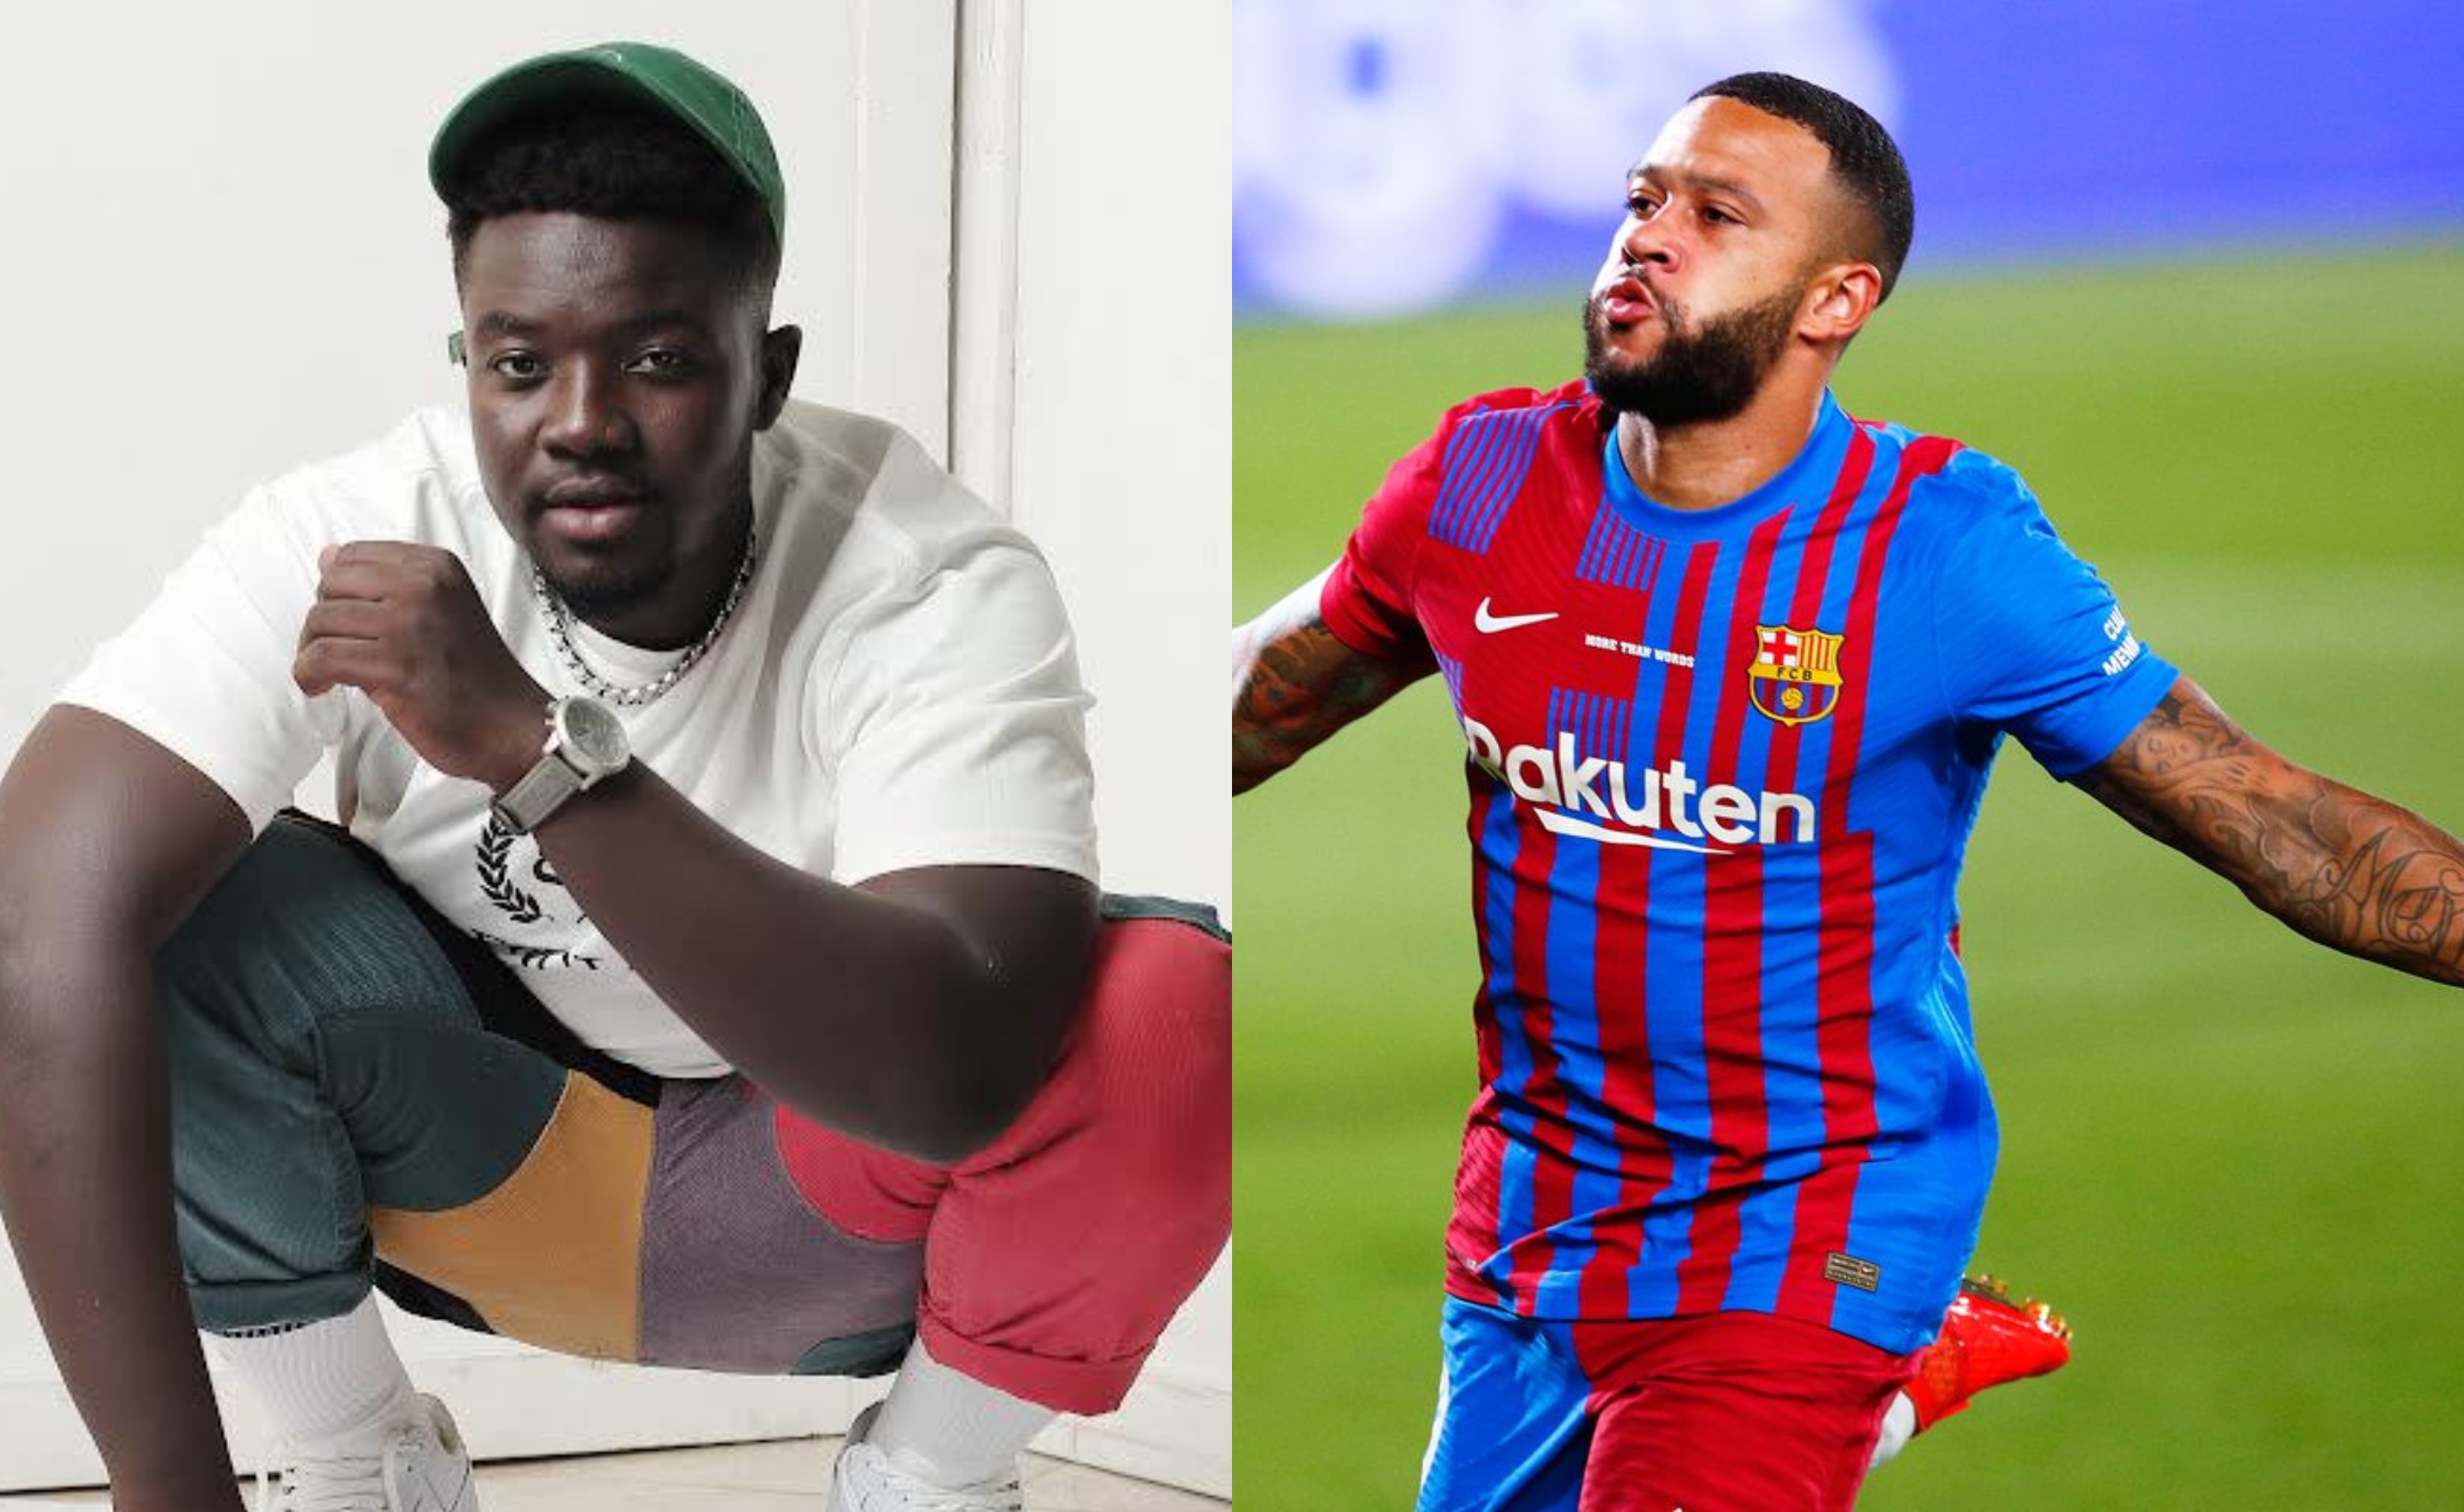 Broni counts Depay jamming to his song a career highlight | Pulse Ghana